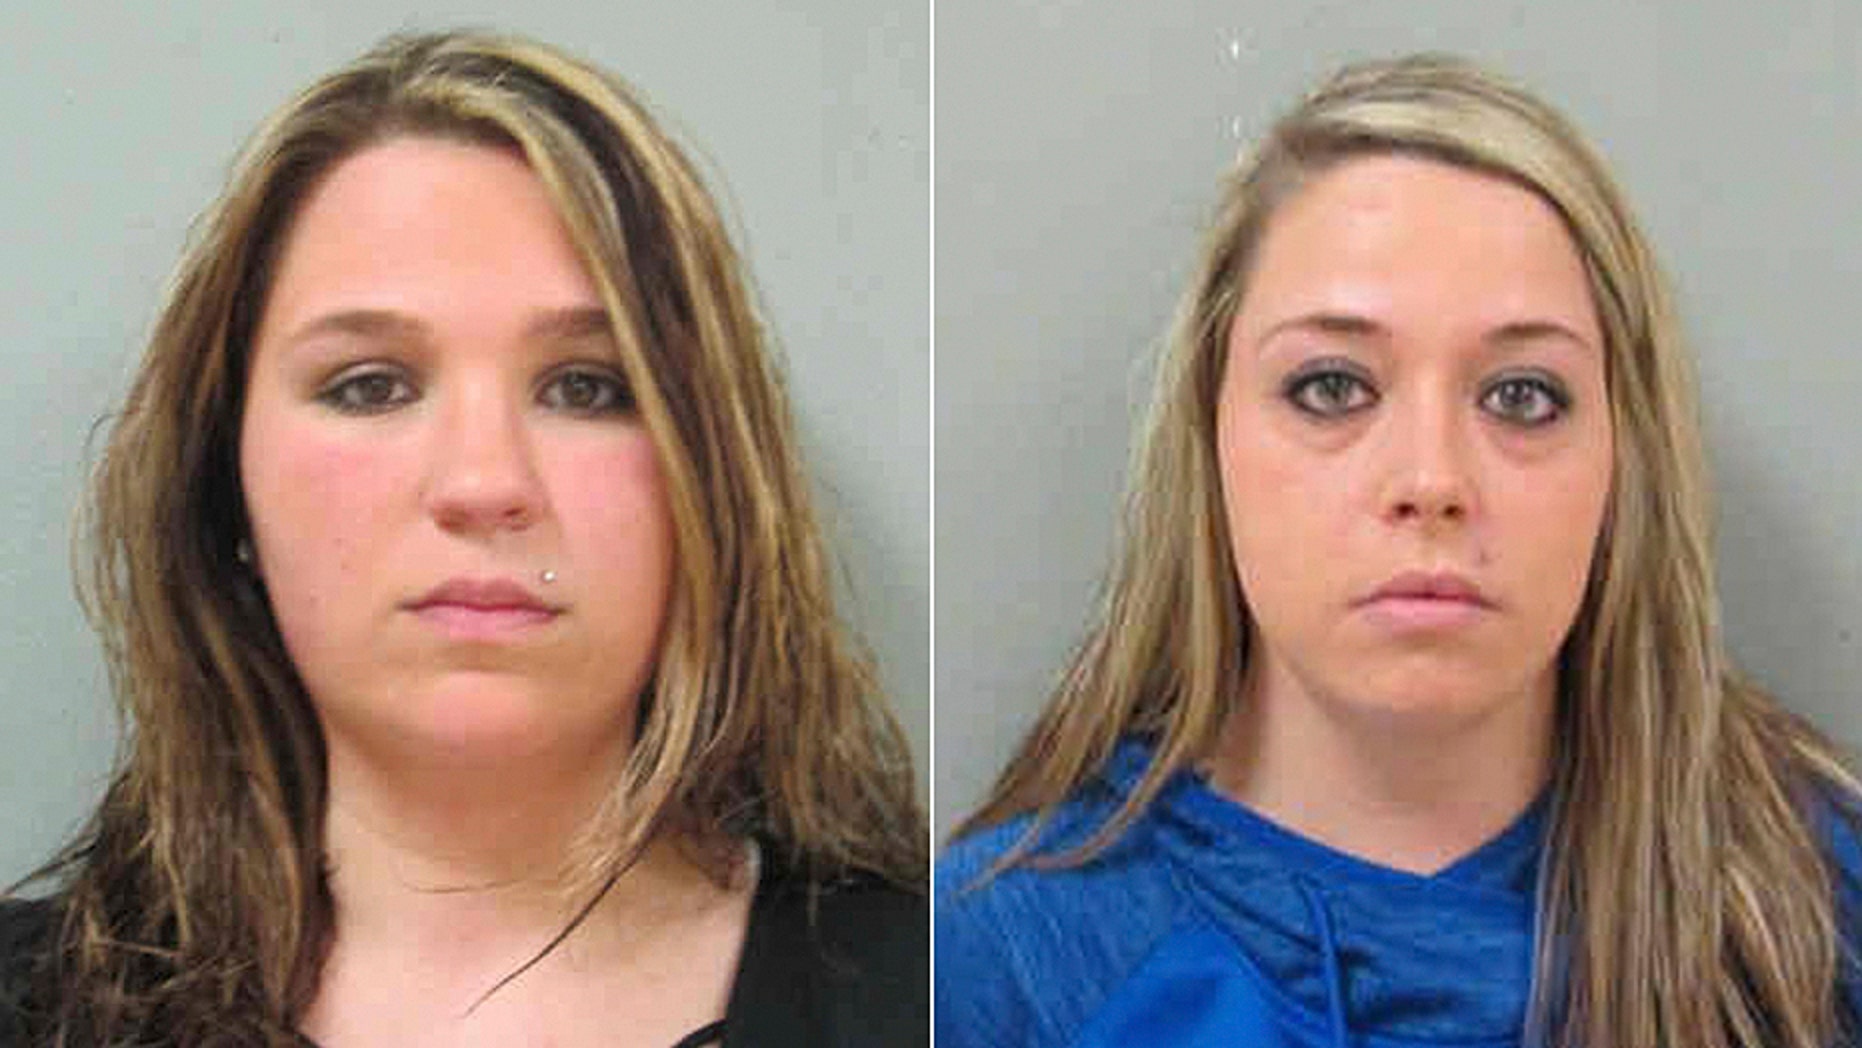 Iowa Nursing Assistants Ages 23 And 26 Accused Of Sex